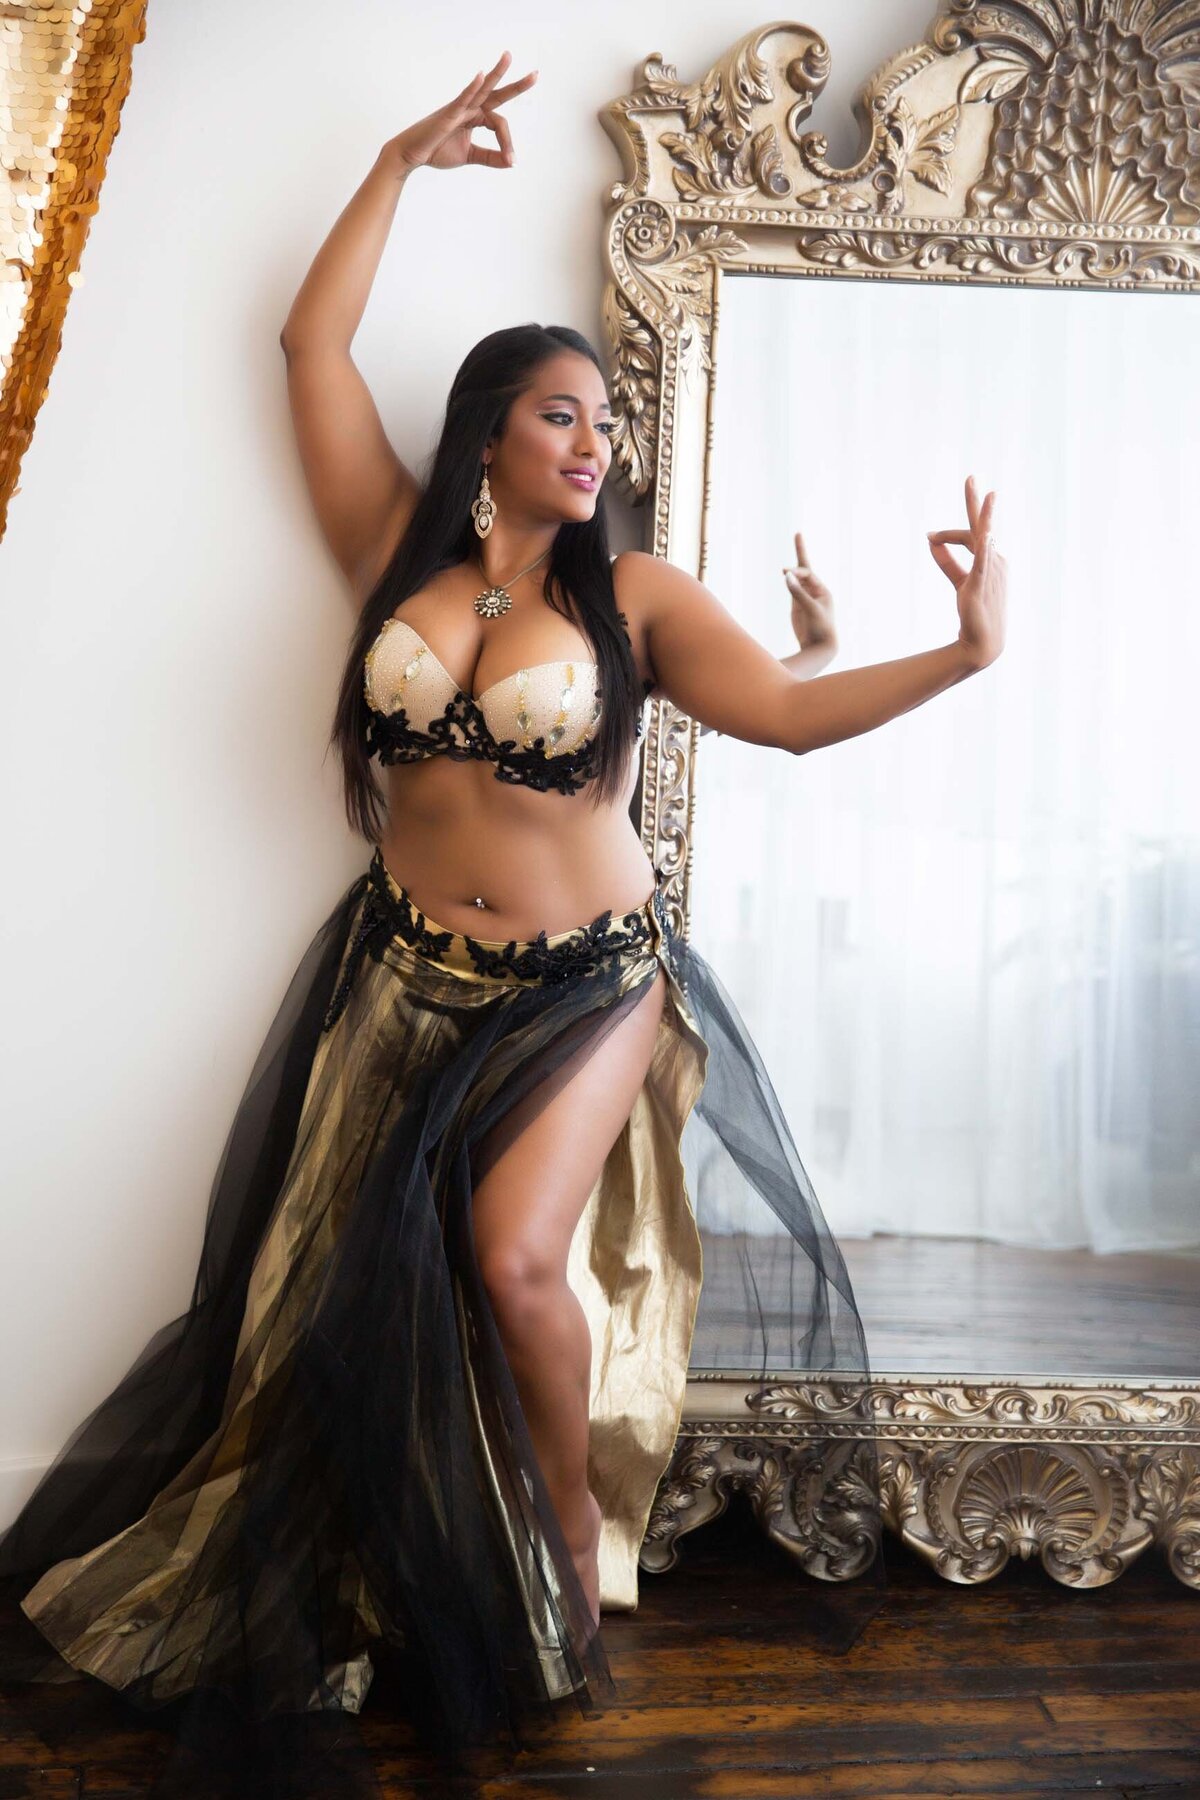 Woman posing in traditional costume for artistic boudoir portrait